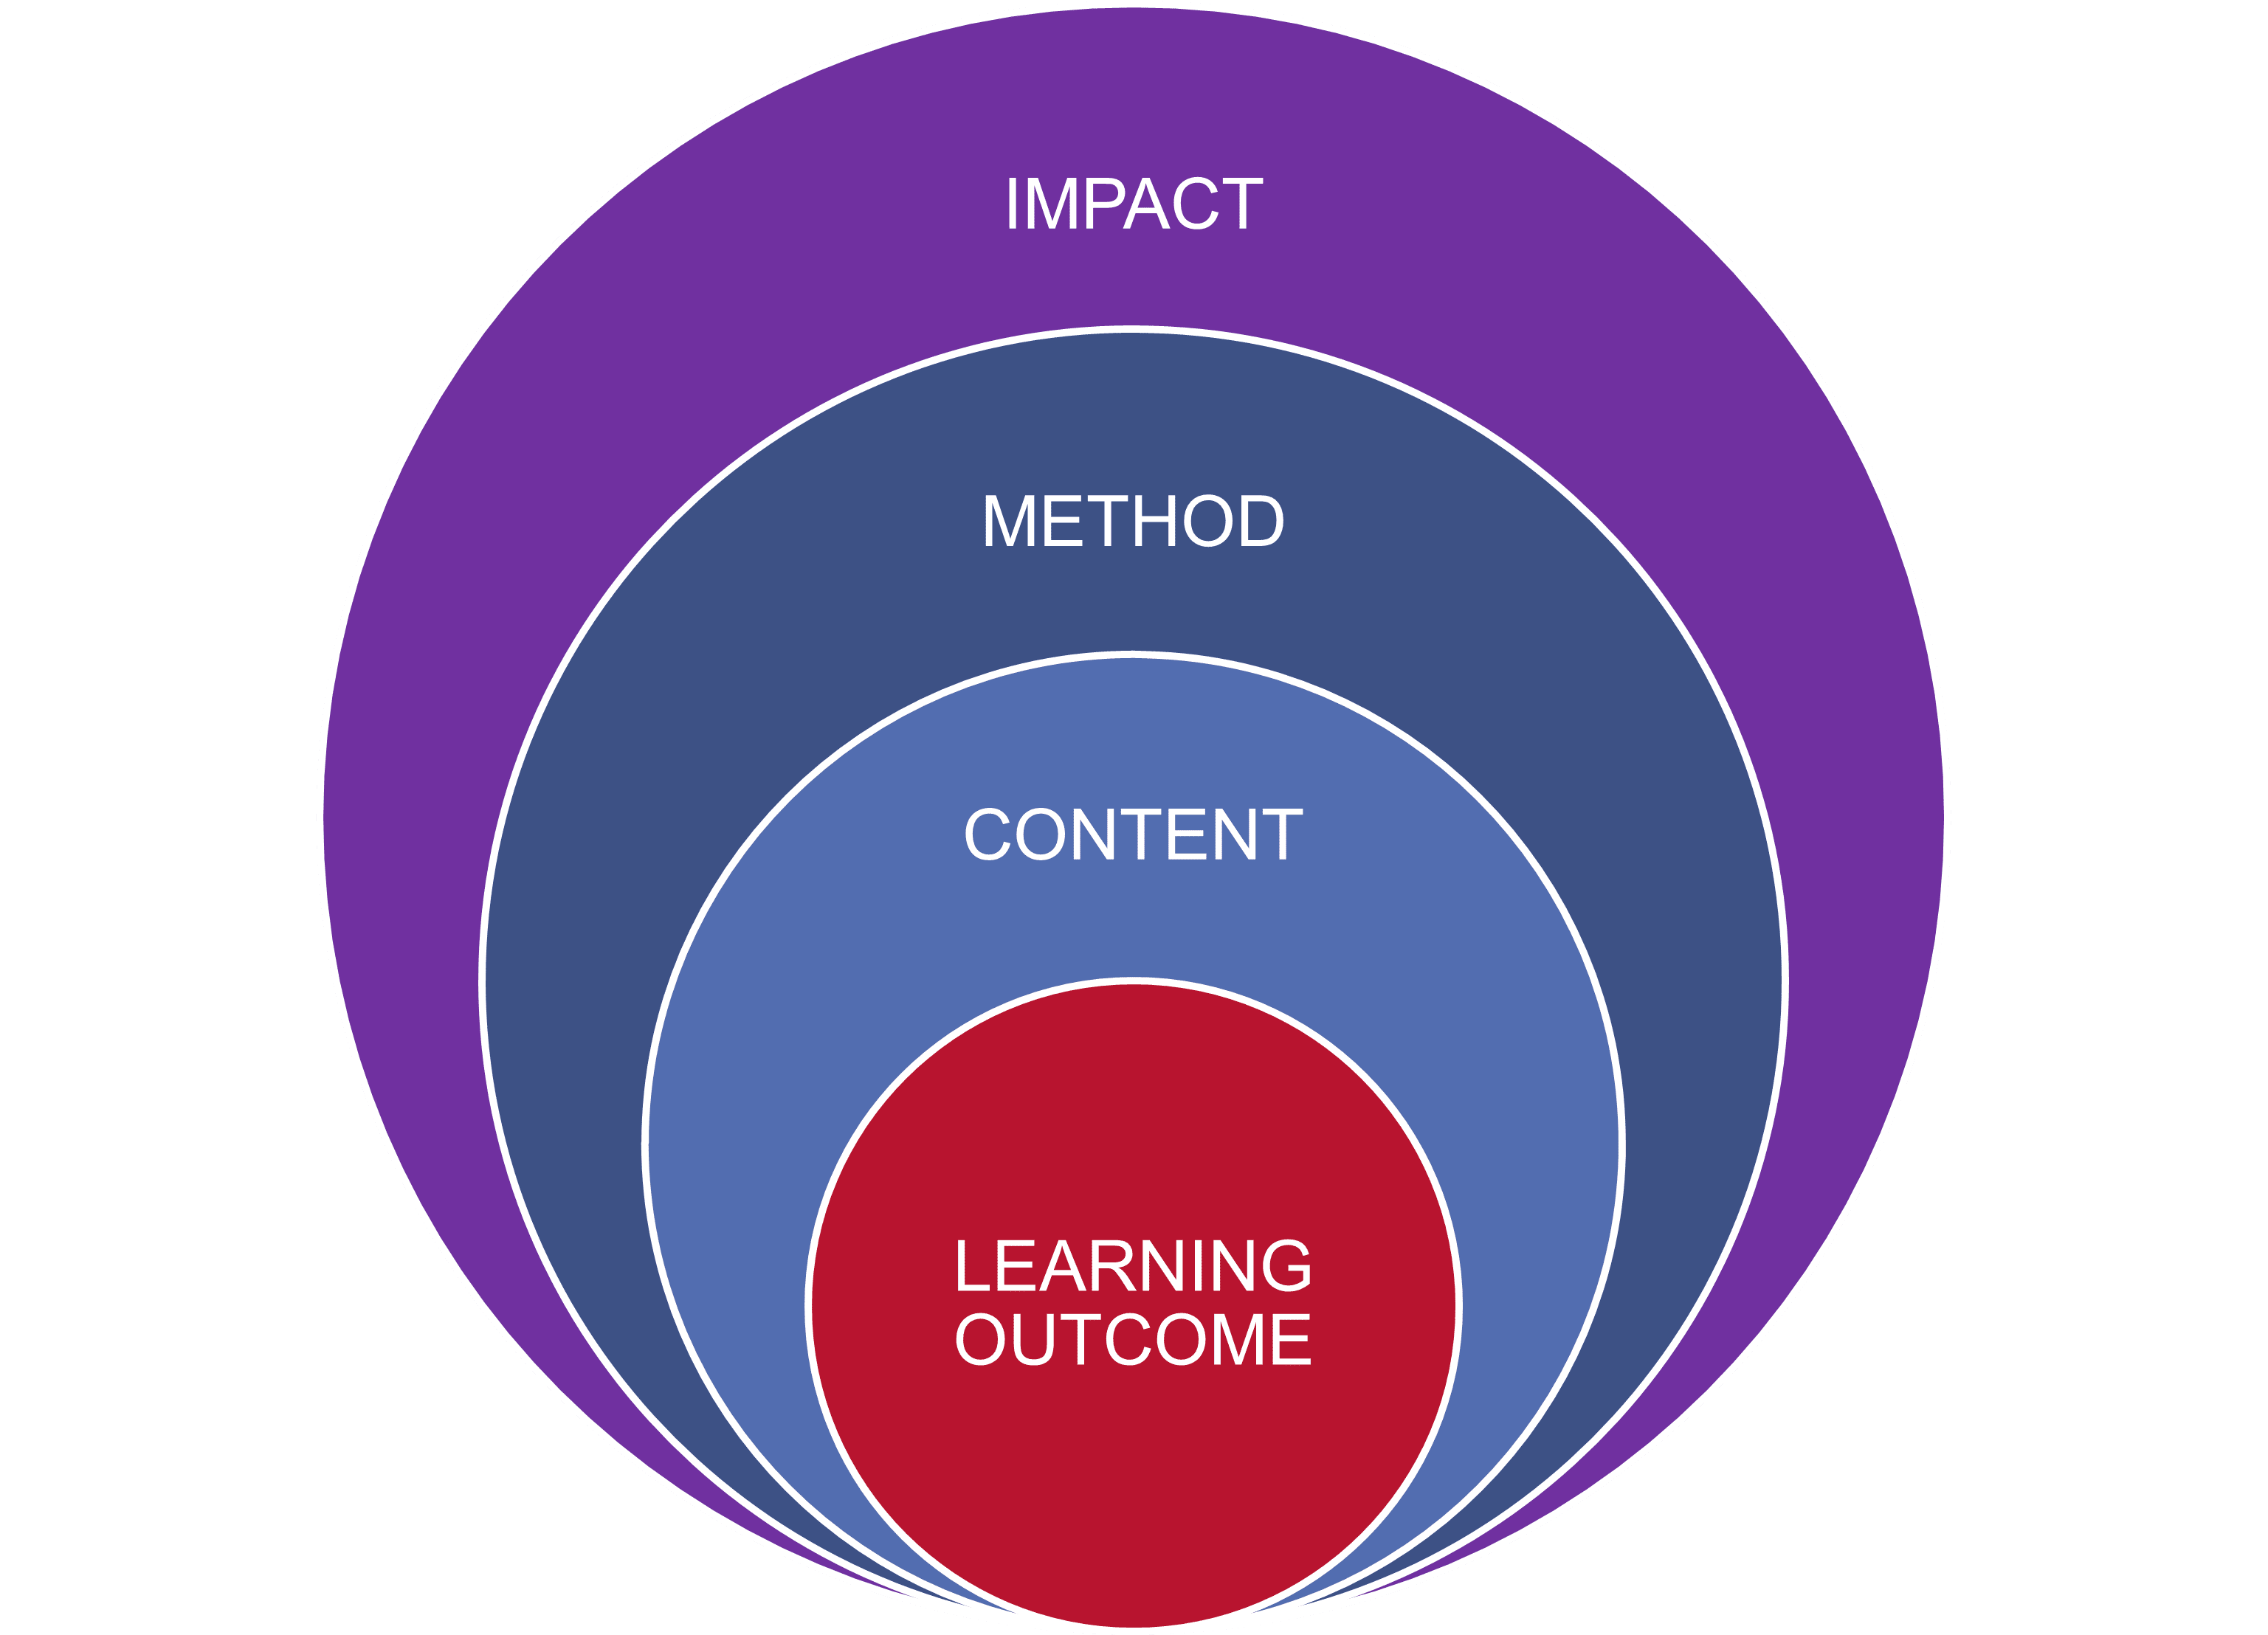 Ways of achieving a learning outcome